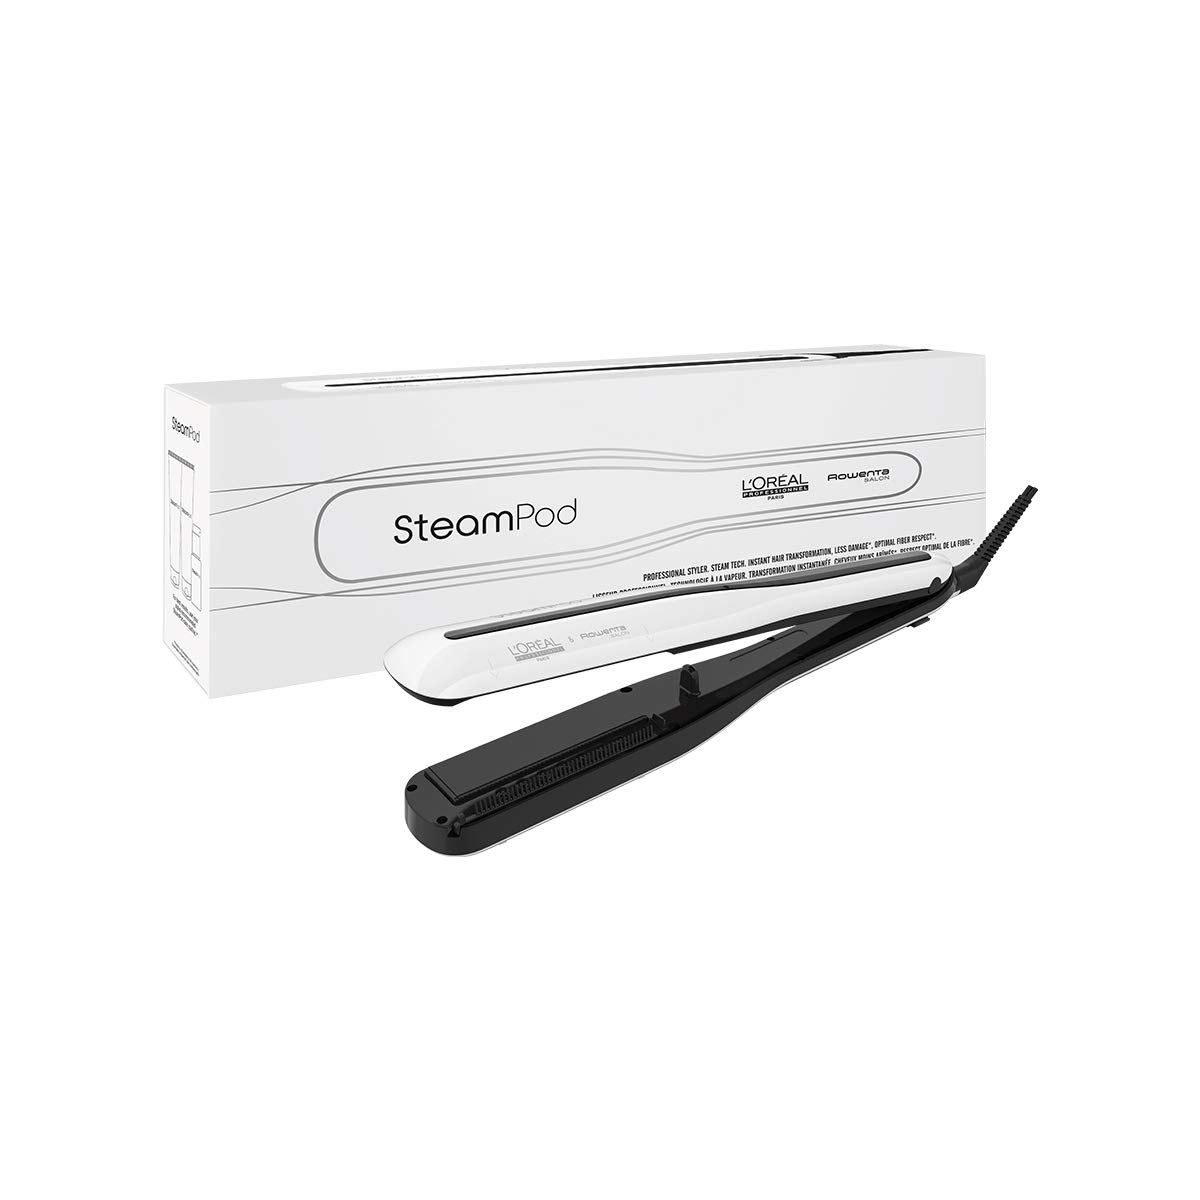 LOreal Professionnel SteamPod Styler 3.0 | steam straightener - care routine for every hair type